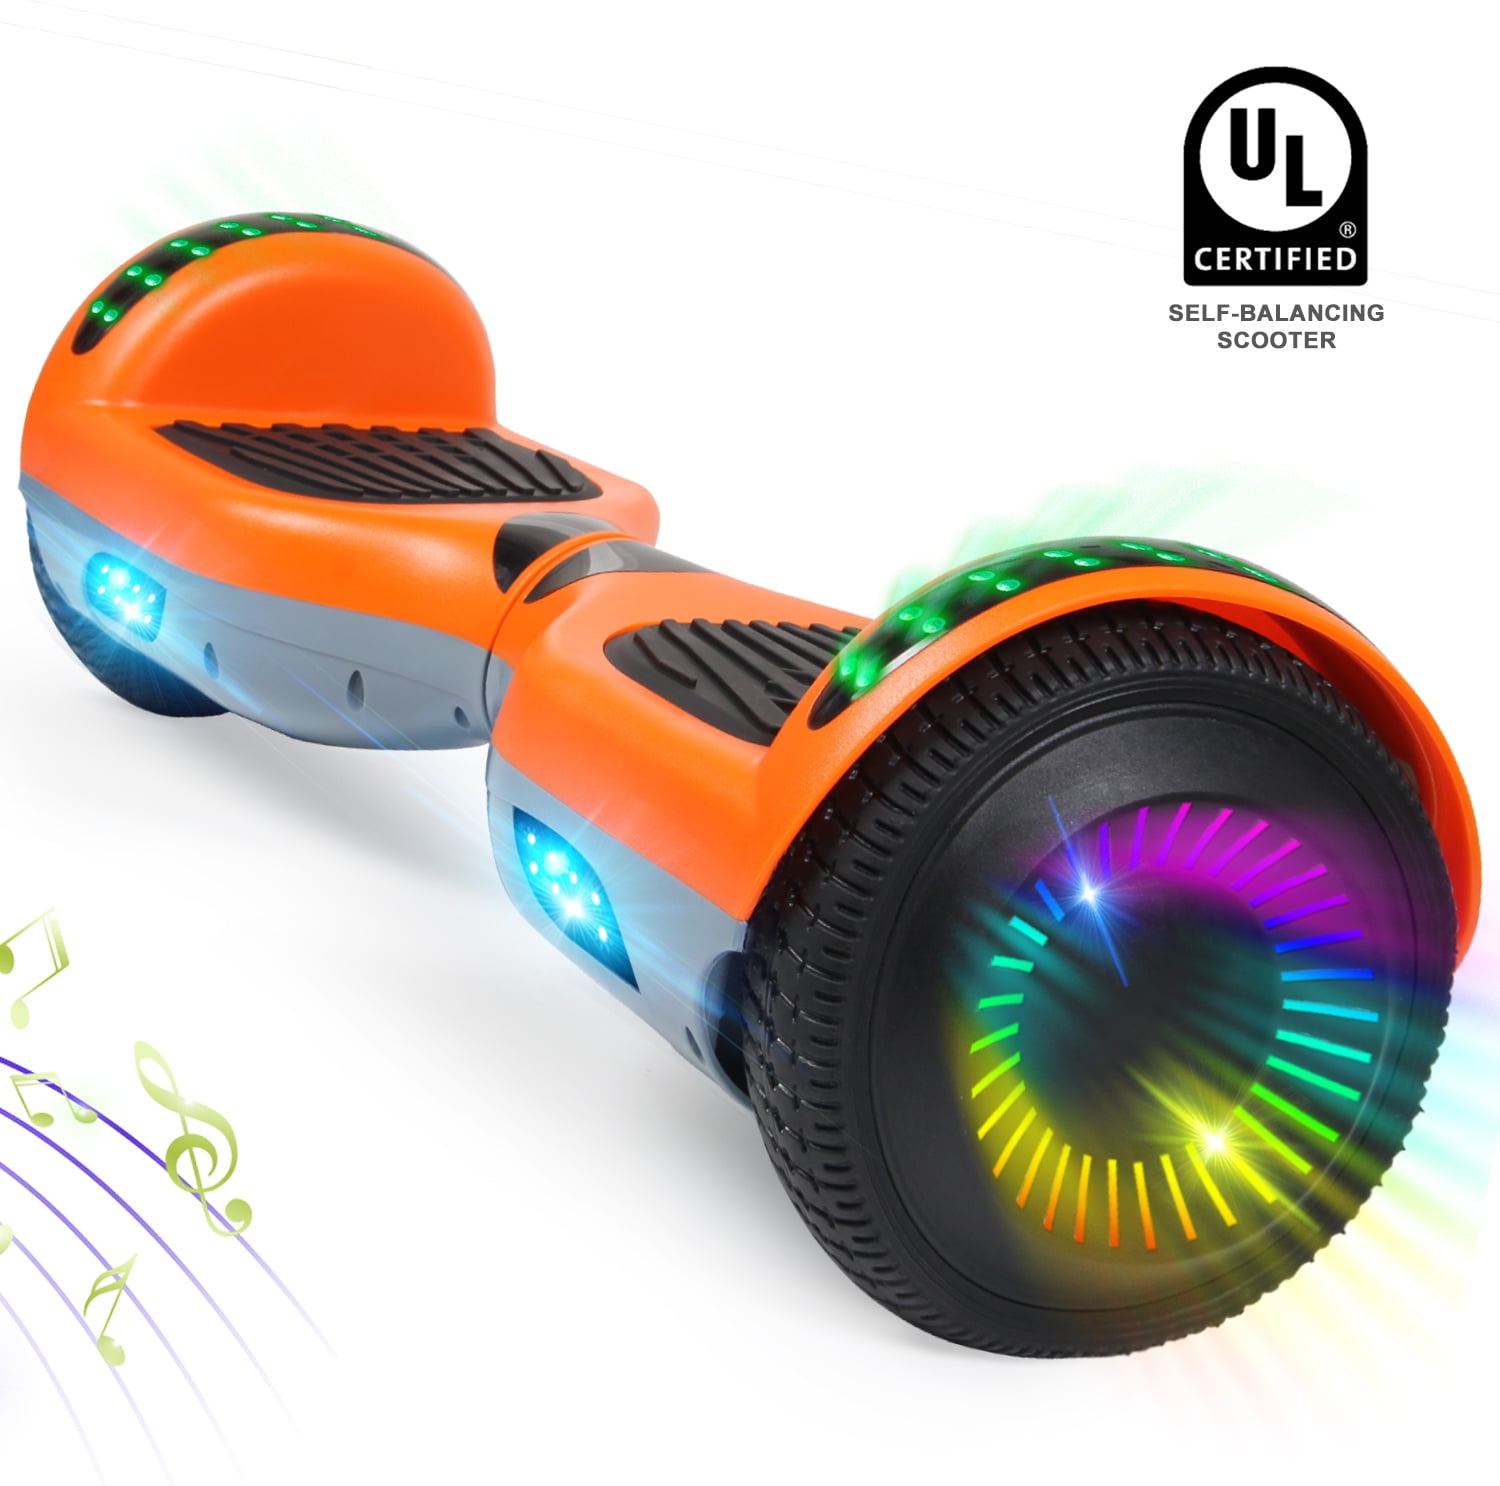 Felimoda Hoverboard with Bluetooth Speaker and LED Lights 6.5 Self-Balancing Scooters Hoverboard for Kids 